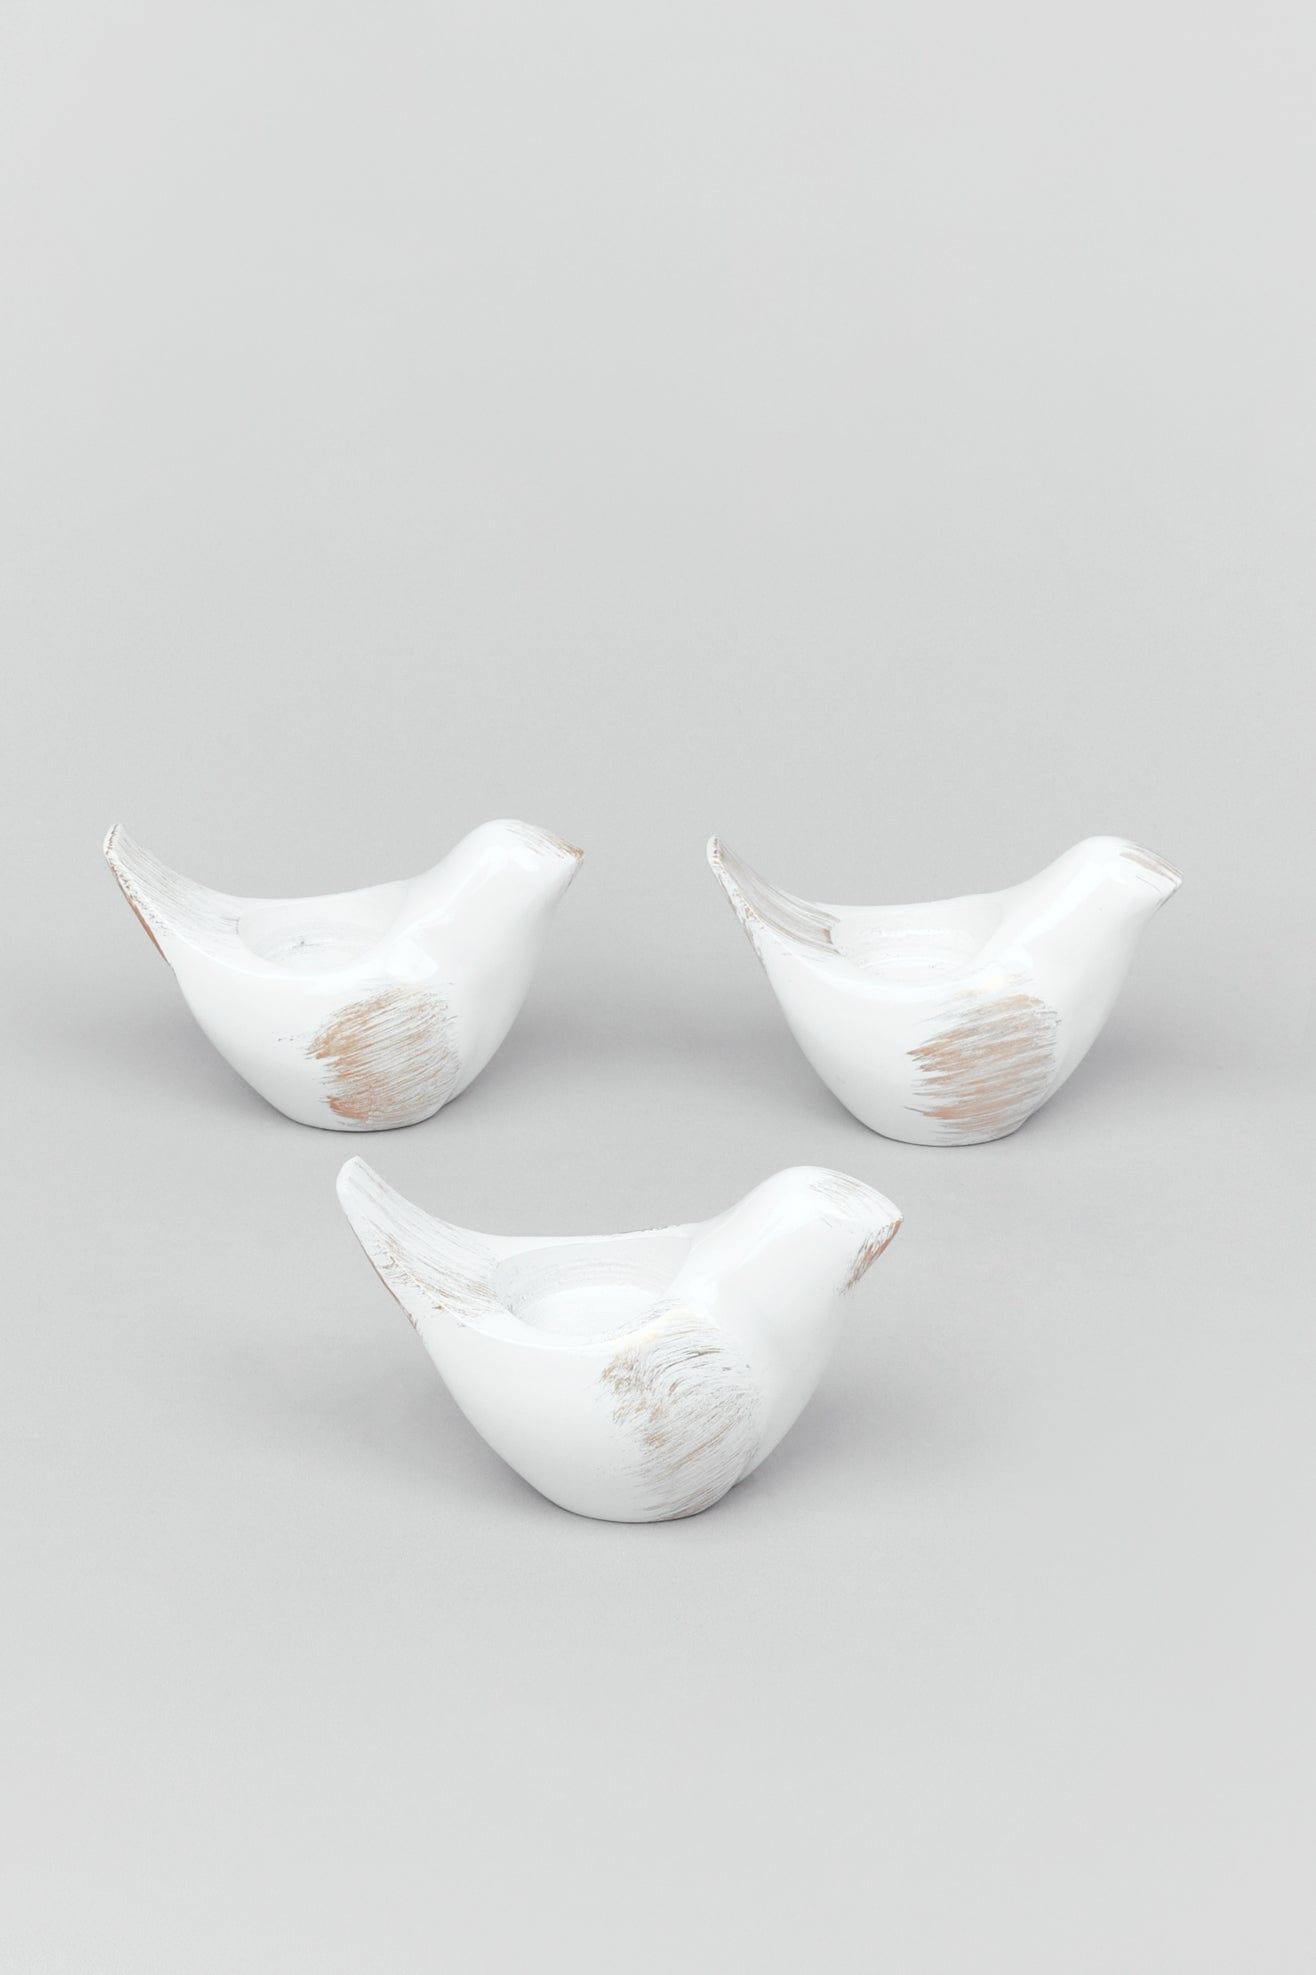 G Decor Candles & Candle Holders Set of Three Set of 3 Rustic Ceramic Pigeon Tealight Holders